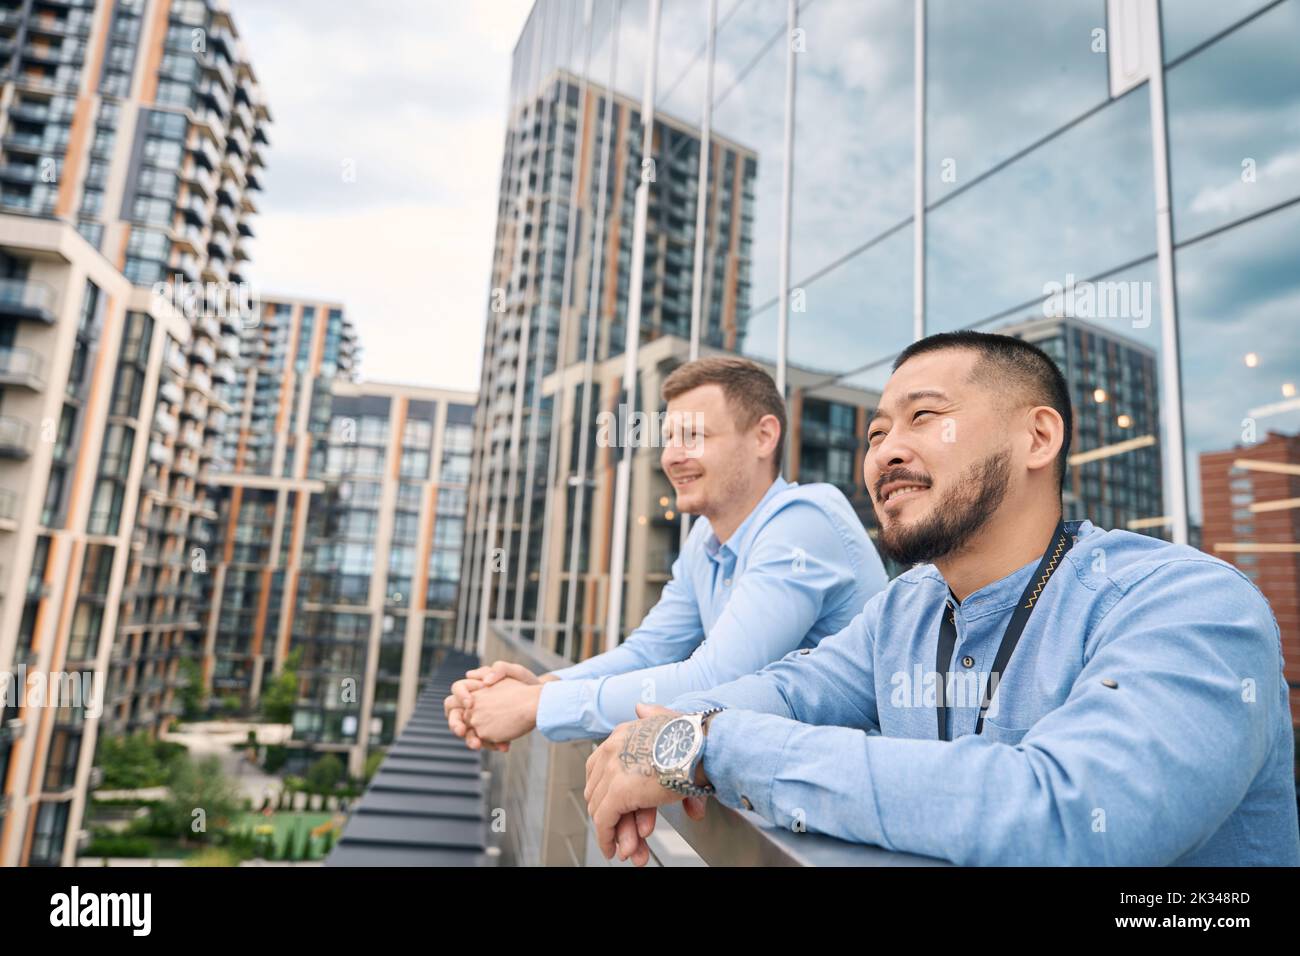 Company worker and his coworker resting on office balcony Stock Photo